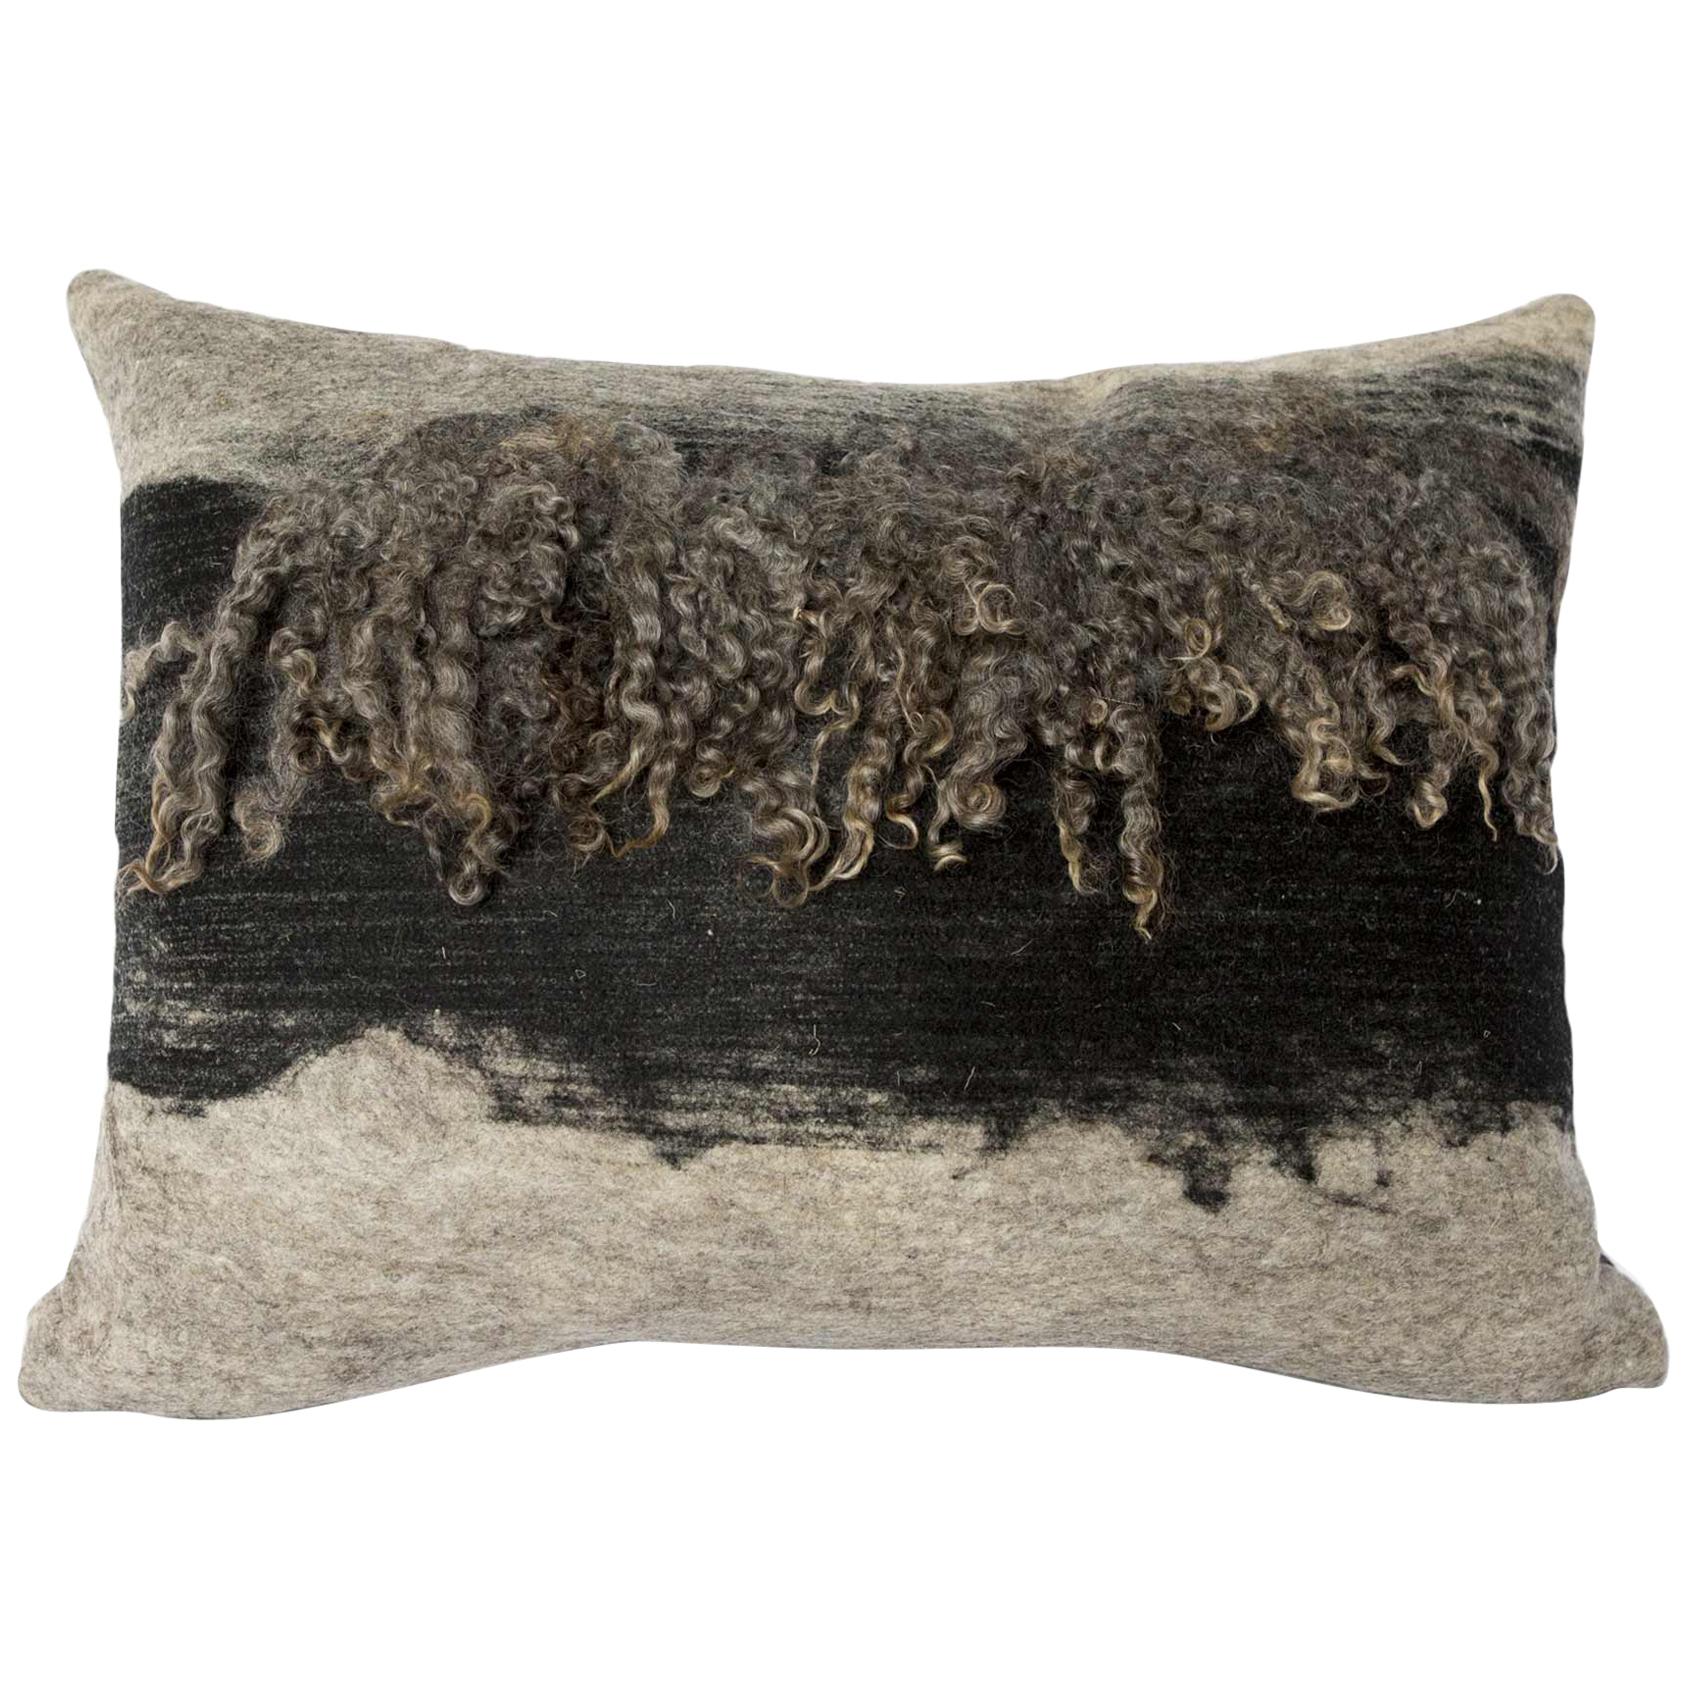 Wool Grey and Black Wensleydale Throw Pillow, Medium, Heritage Sheep Collection